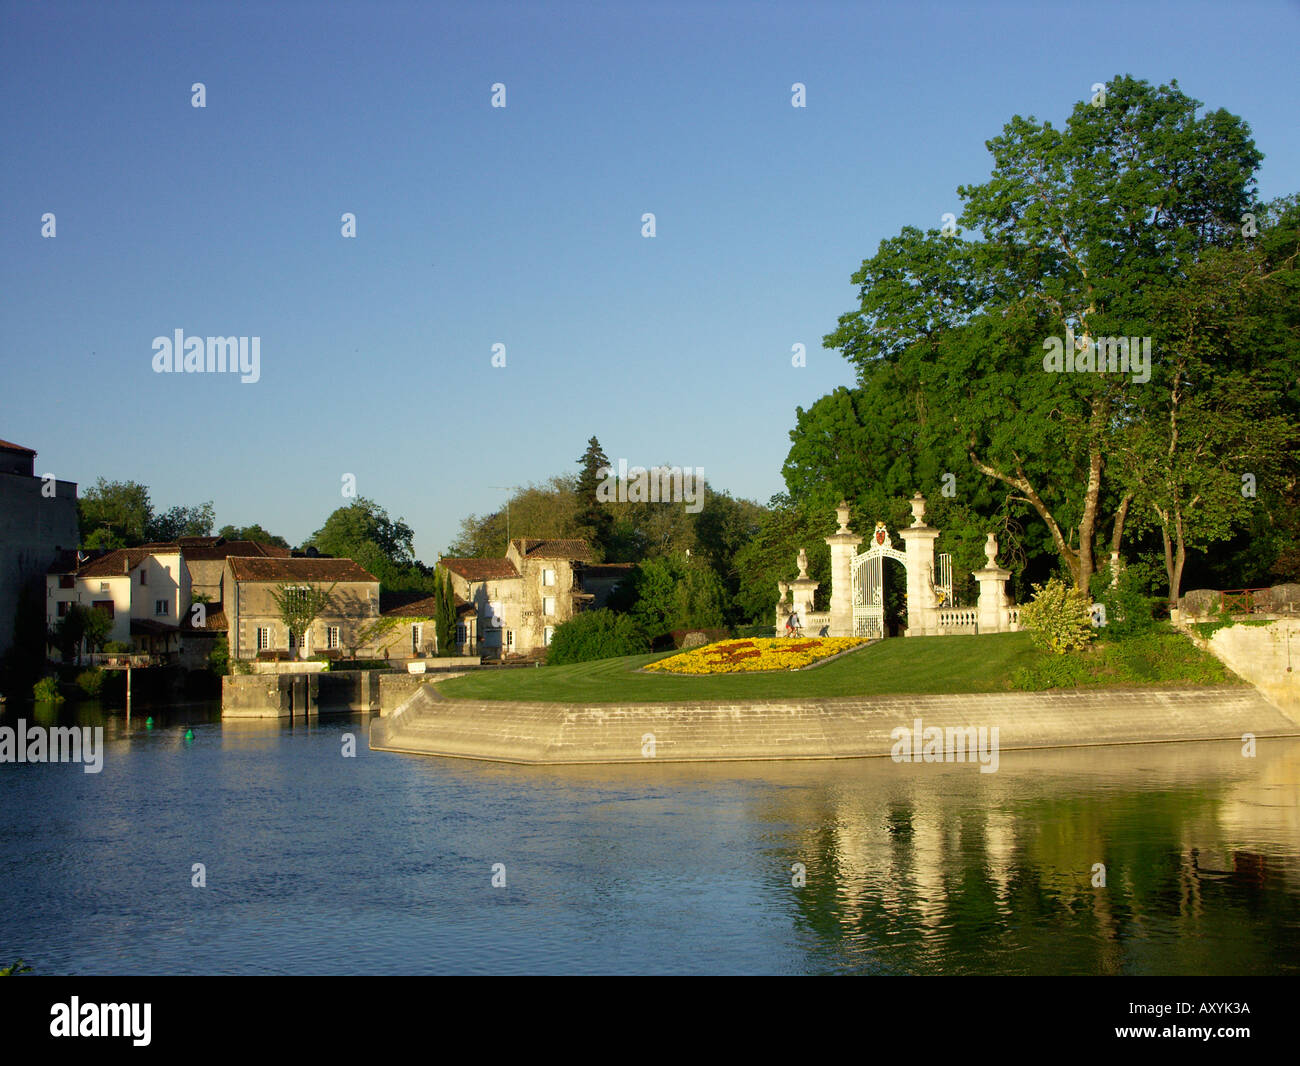 Park gates by the Charente River in Jarnac Charente France Poitou Charentes Stock Photo